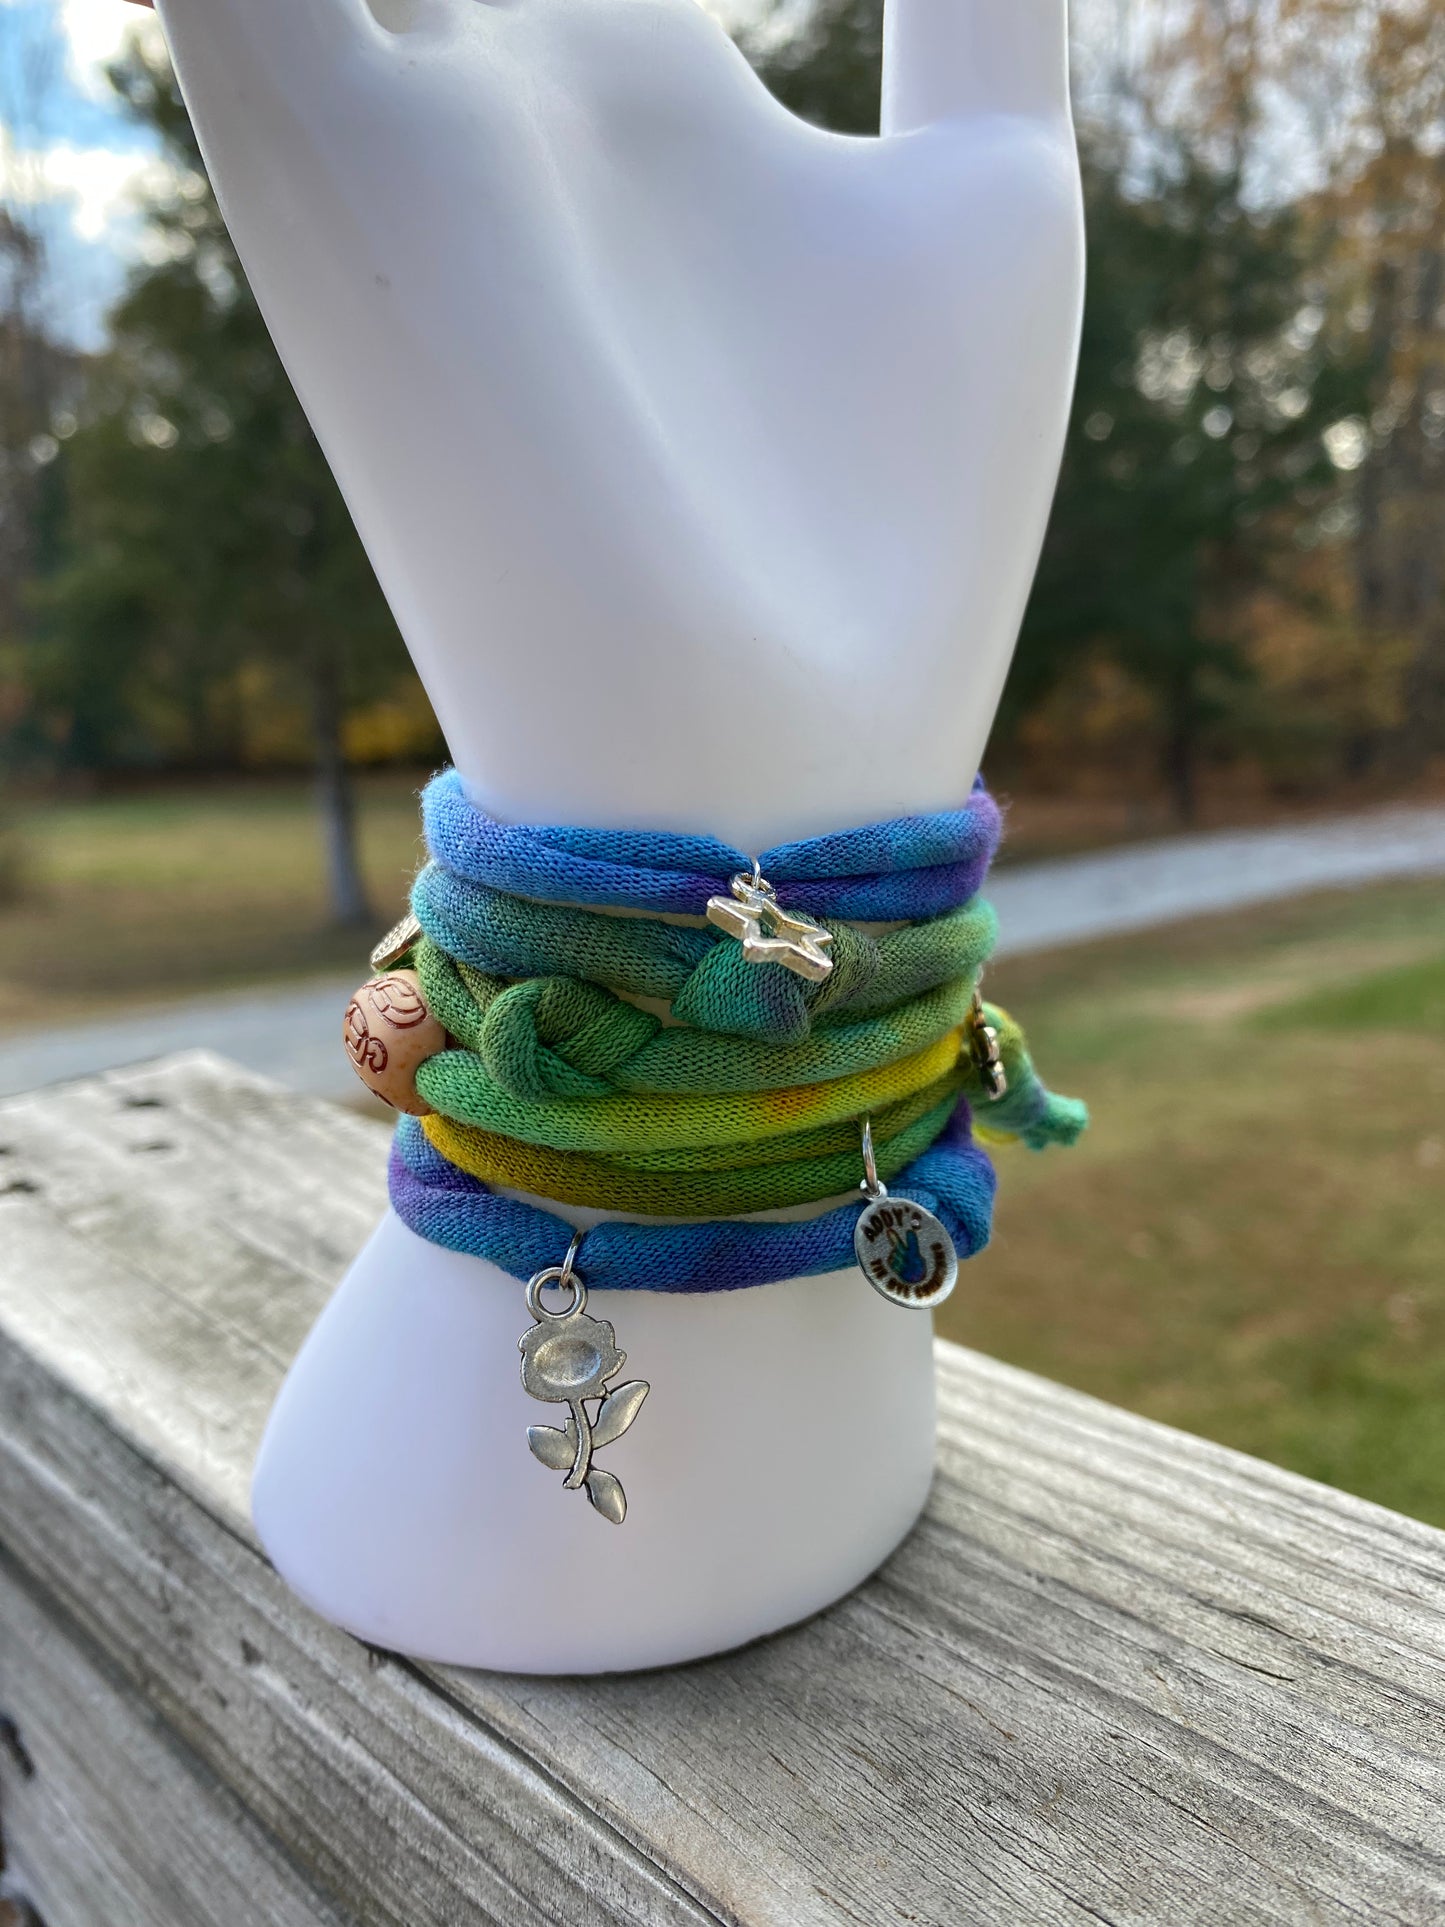 Wild and Free Natural Wraps -Charm Bracelet, necklace, anklet. Your choice of fun design and colors! I’m